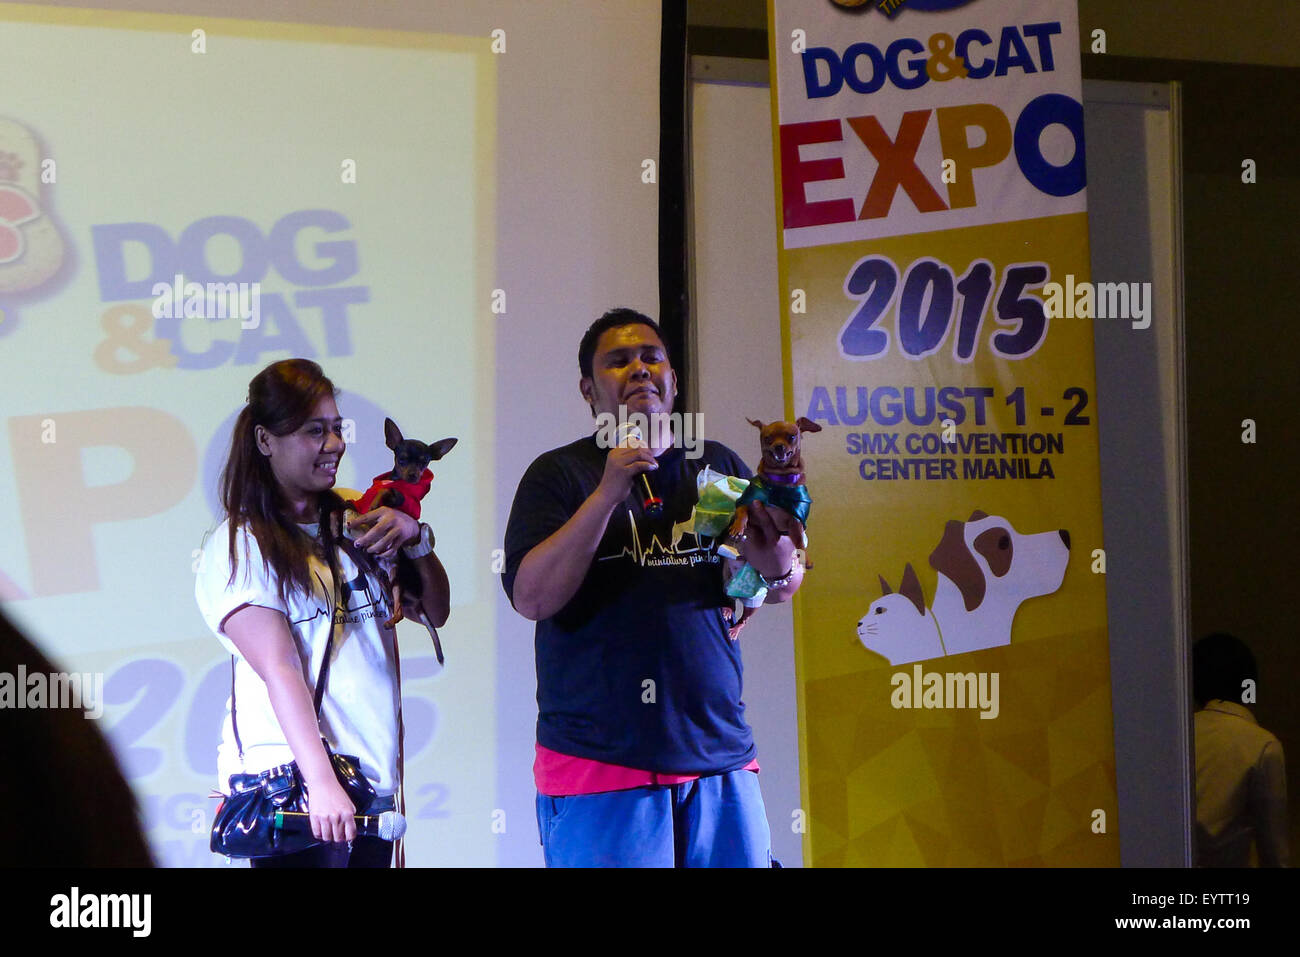 The Emcees during the trade fair giving their personal experiences about breeding of Mini Pinschers. Different breeds of dogs and cats, Dog breeders, Pet lovers unite for the same purpose, to show their care on their pets, in a unique fashion during Pet Express Dog and Cat Expo at the SMX Convention Center in Pasay City. Stock Photo